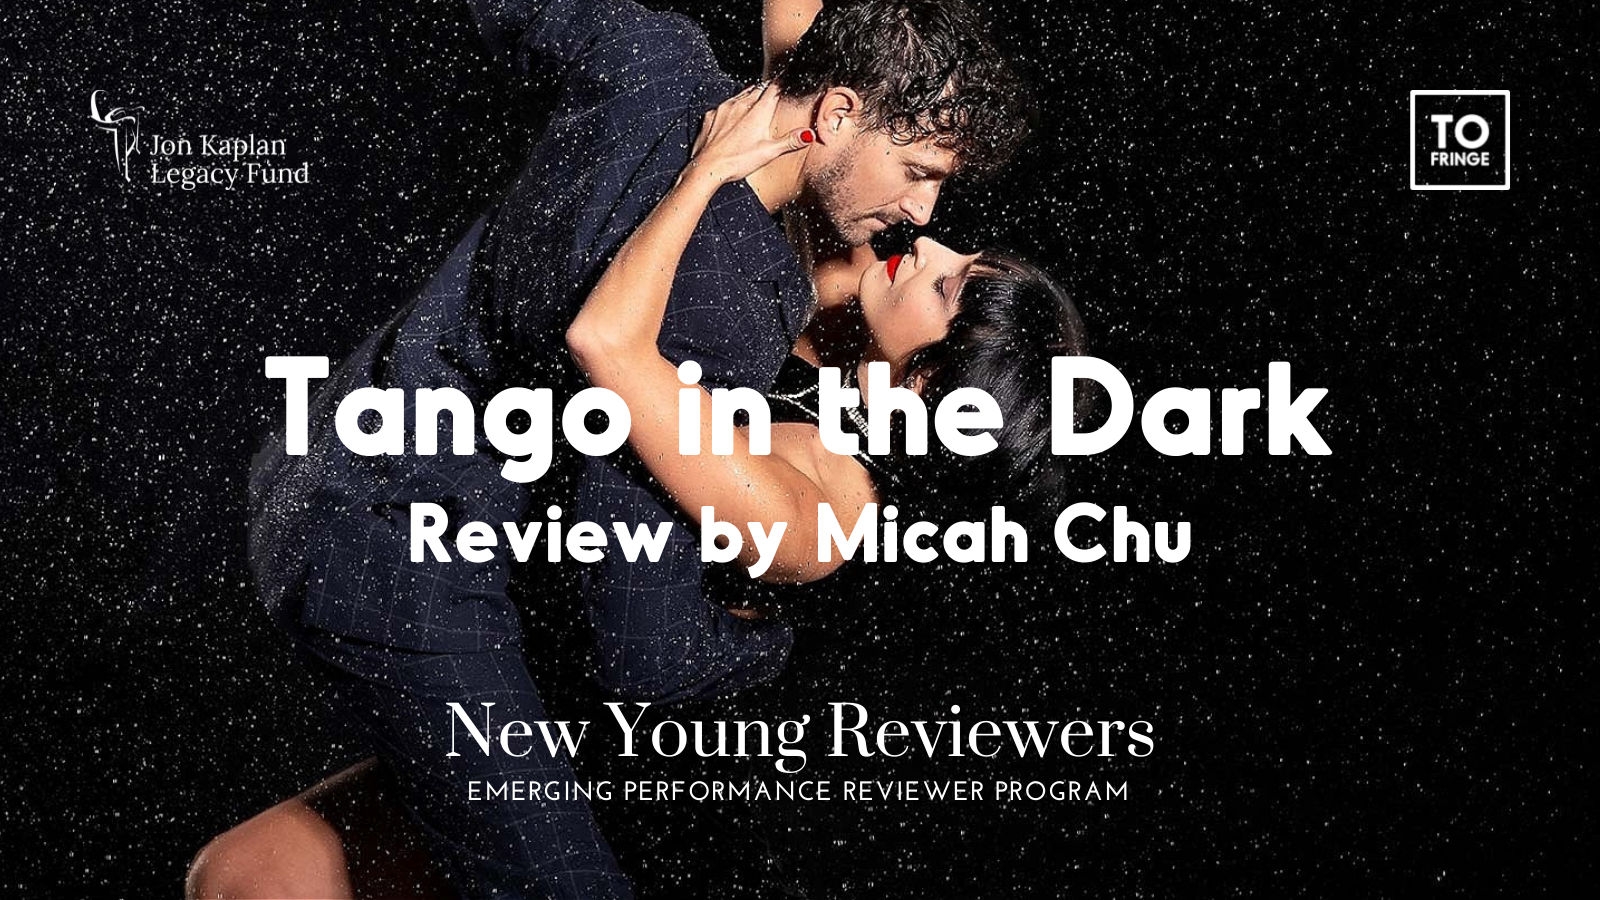 A New Young Reviews banner image with a photo of two people embraced while tango dancing. It reads “Tango in the Dark. Review by Micah Chu.” with partner logos.